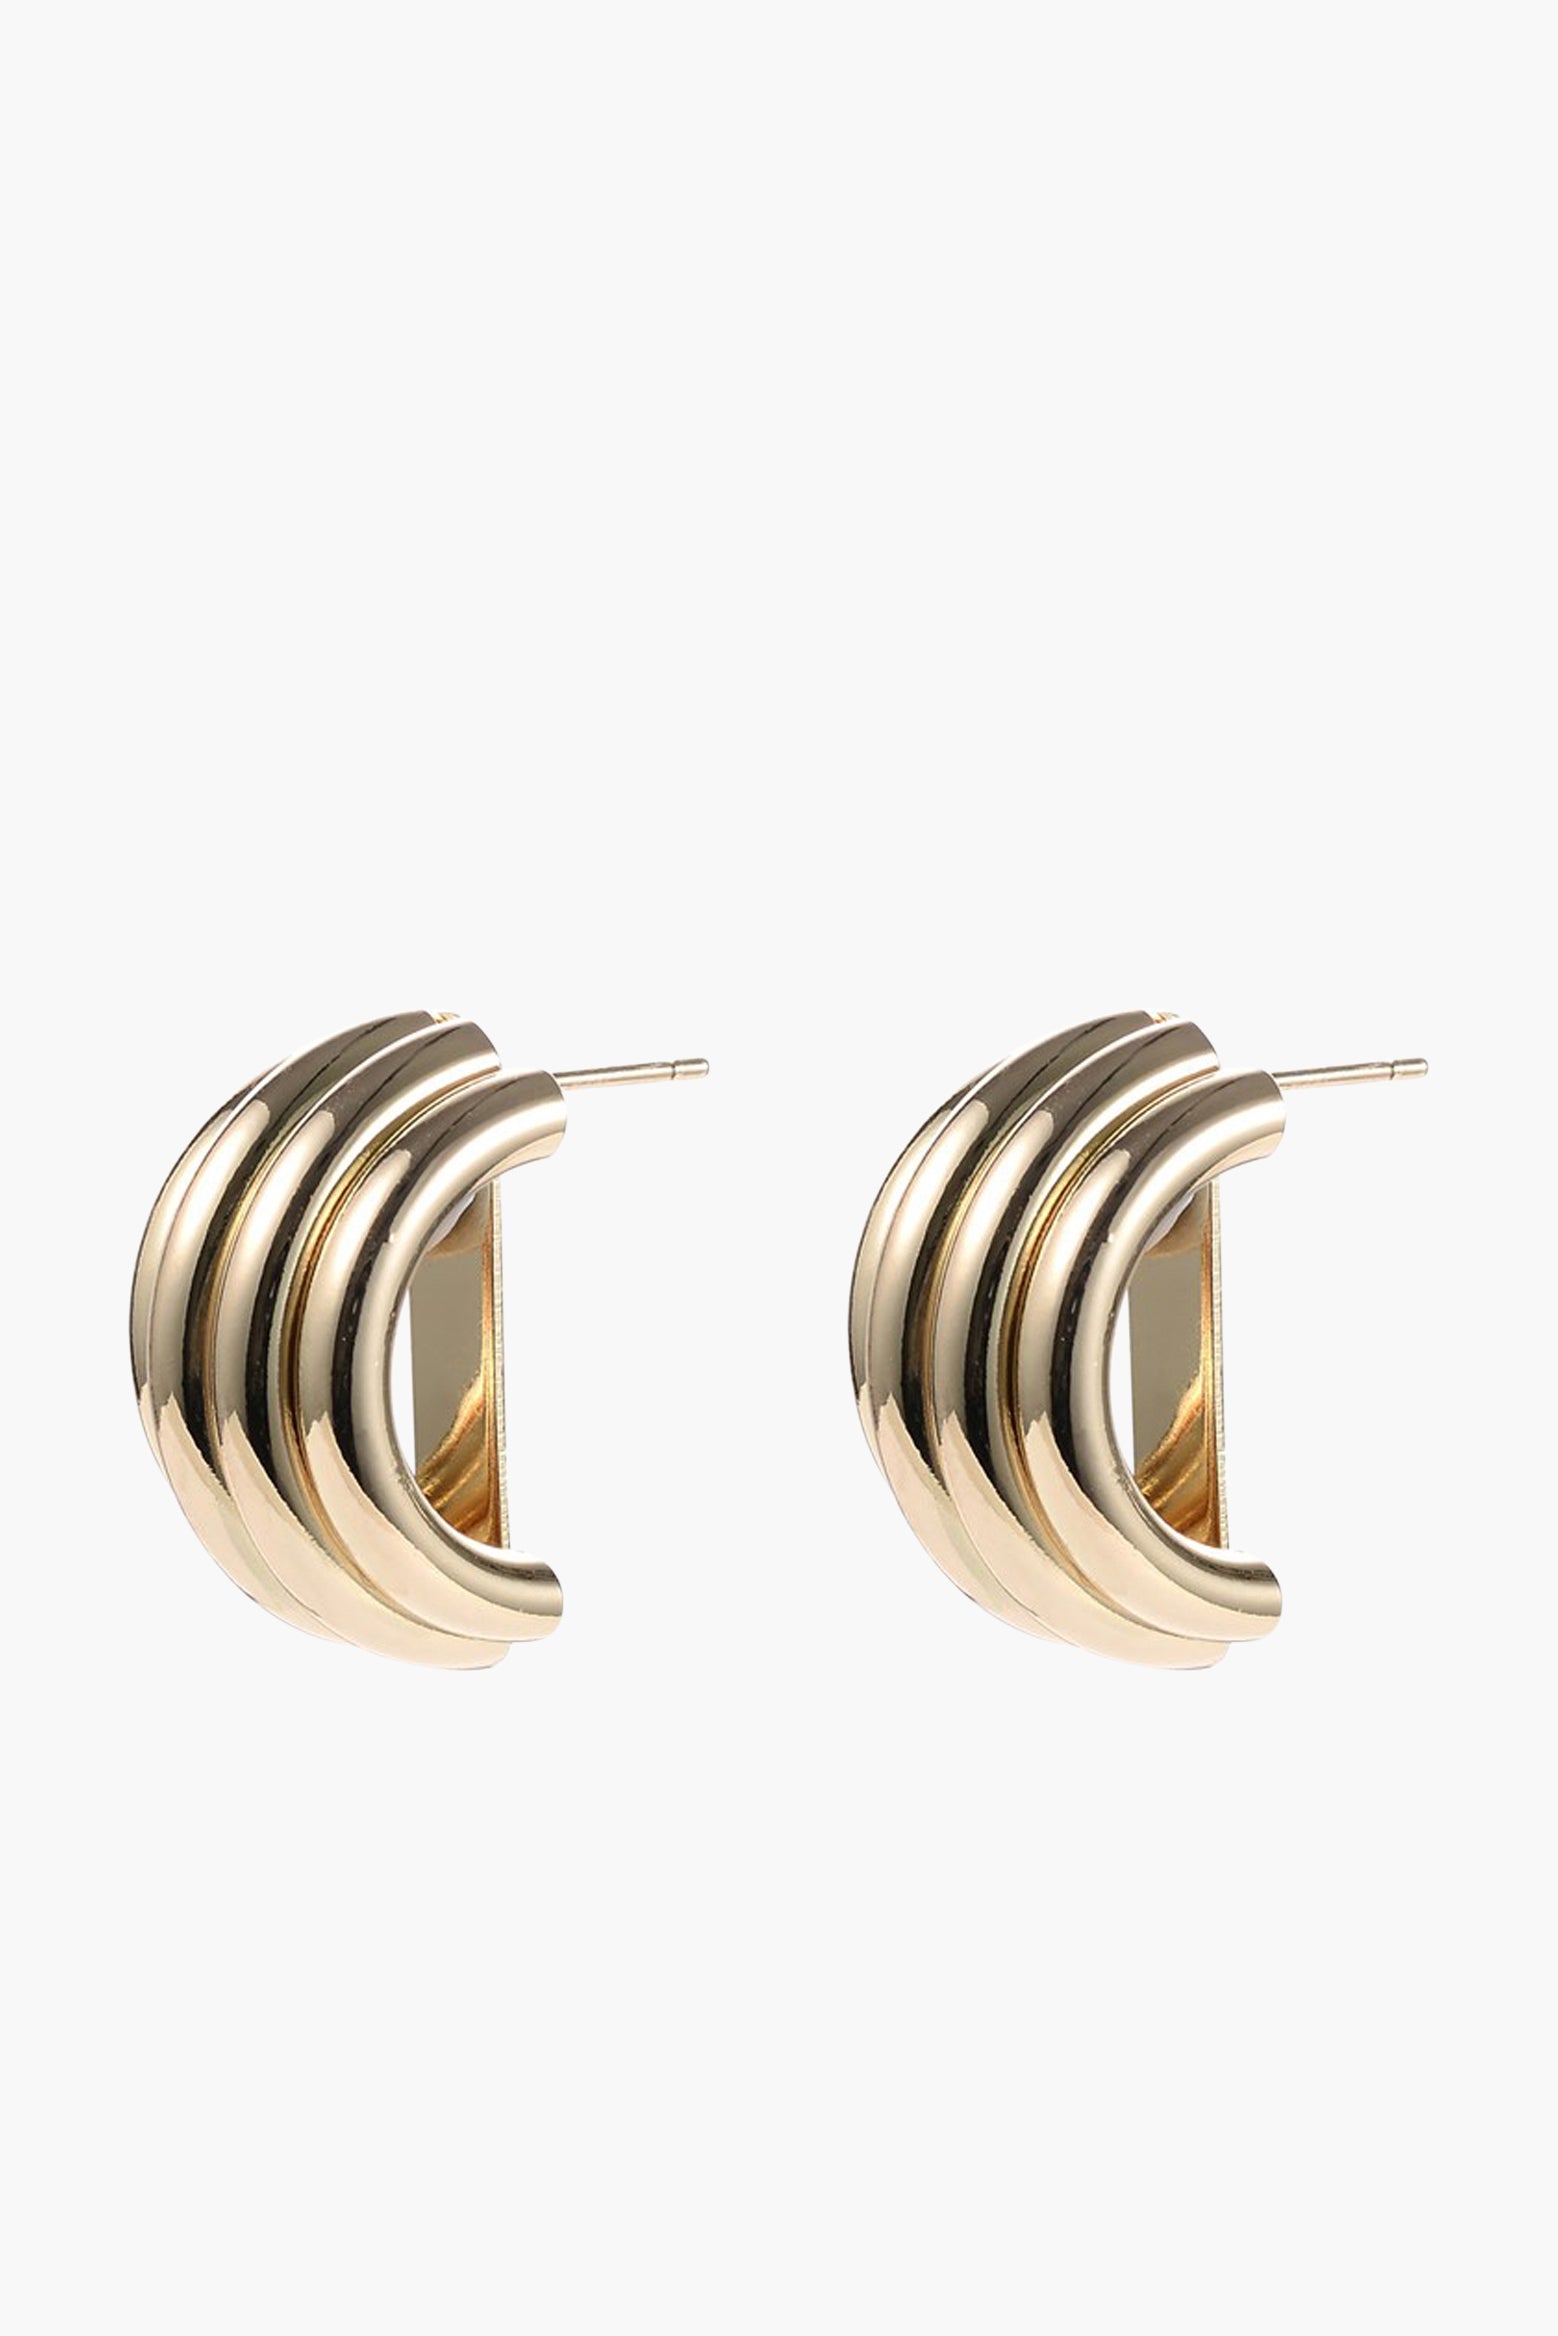 Anna Rossi Europa Earring in Gold available at TNT The New Trend Australia